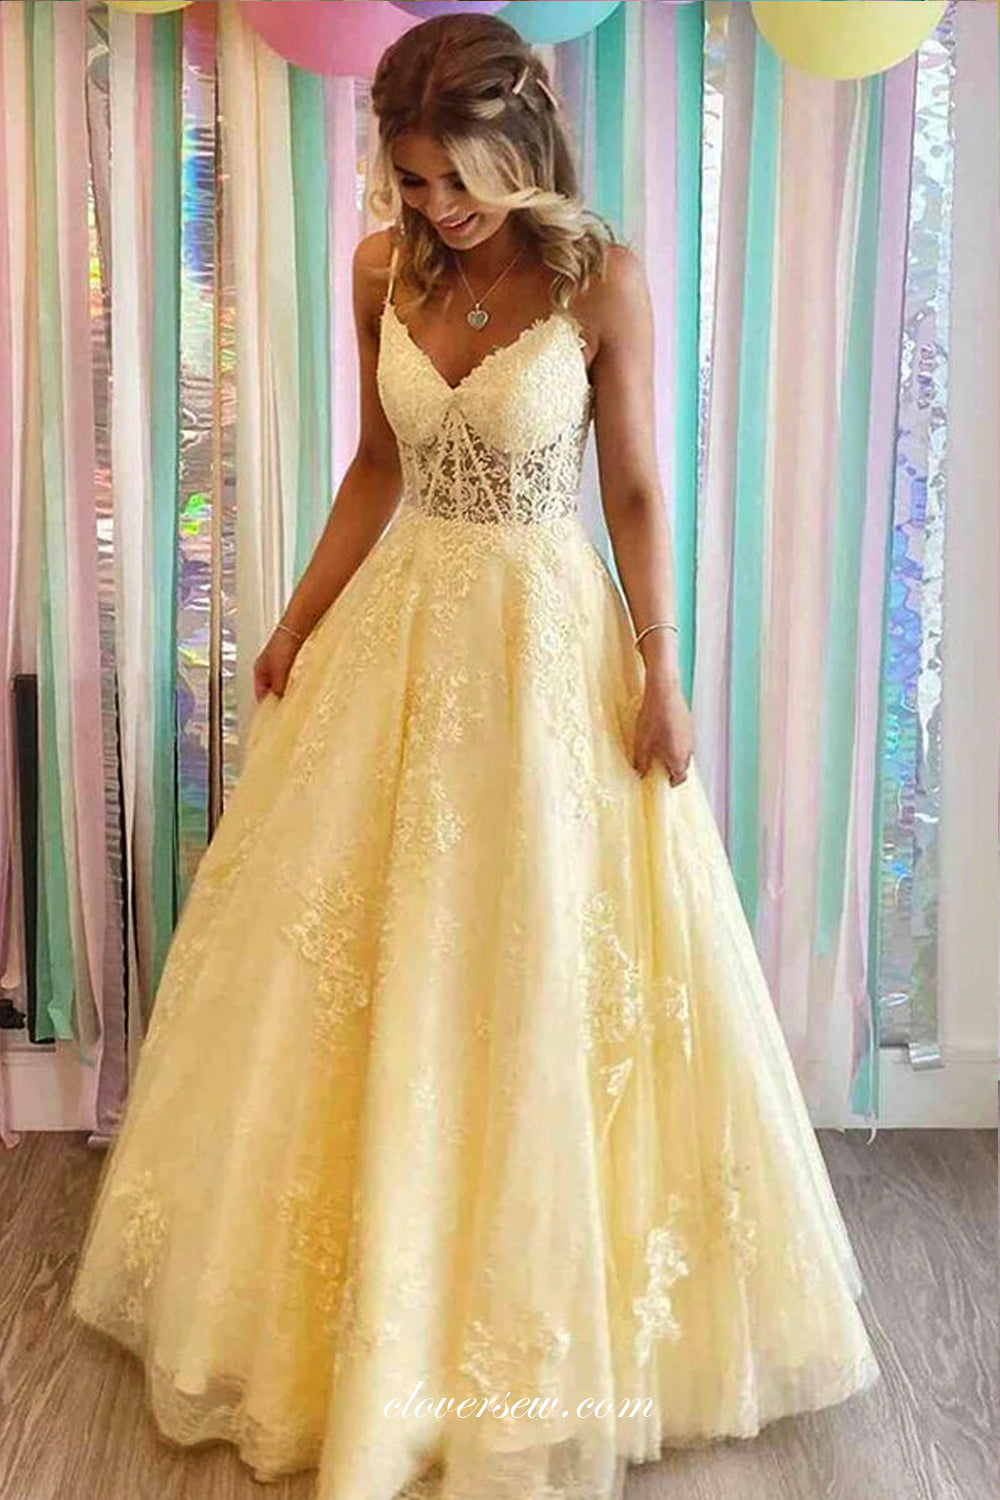 Yellow Lace Spaghetti Strap Lace Up Back A-line Senior Prom Dresses, CP0966